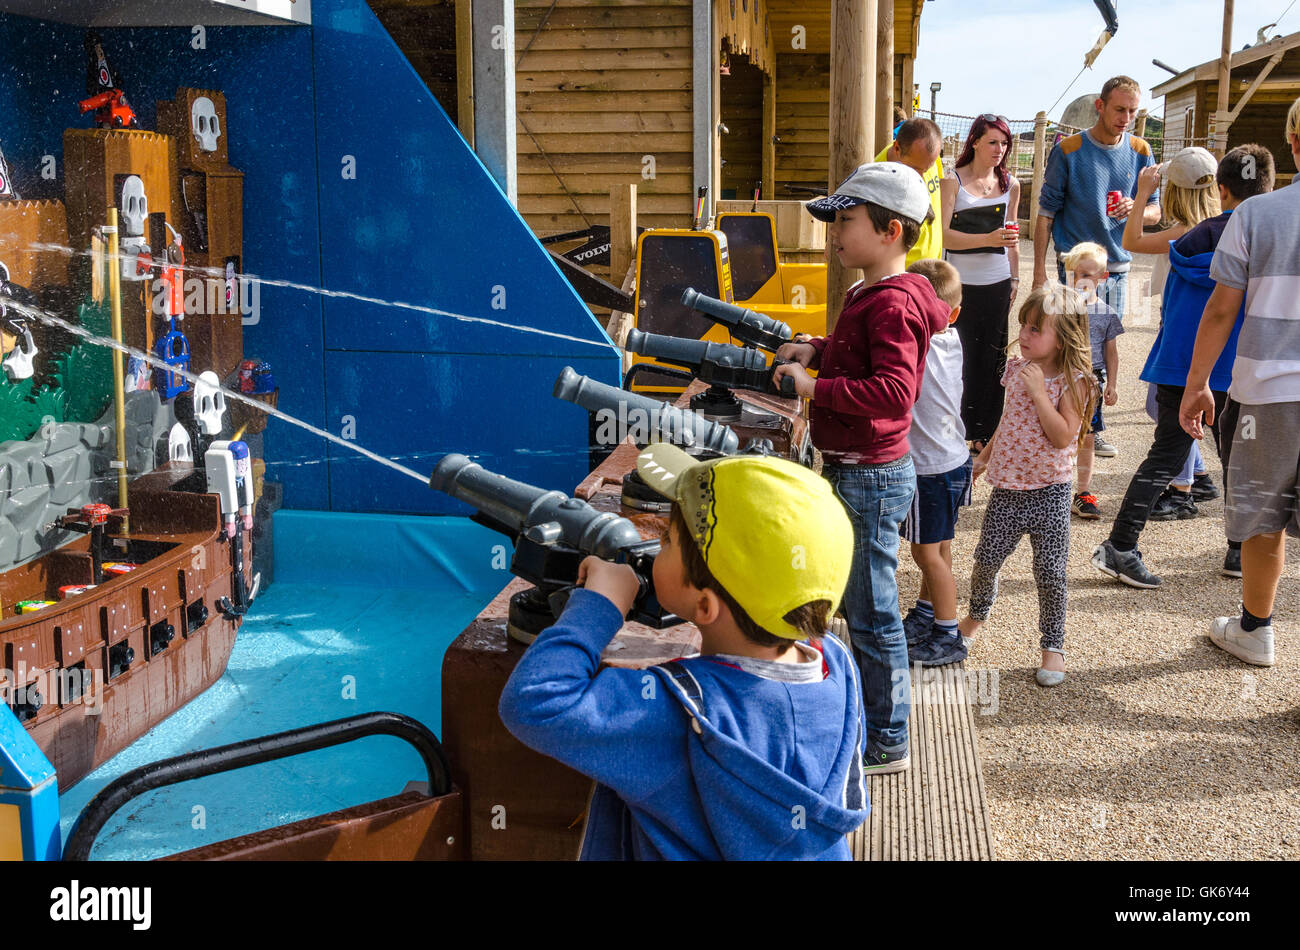 A couple of young brothers play on a water cannon shooting game at the fairground Stock Photo